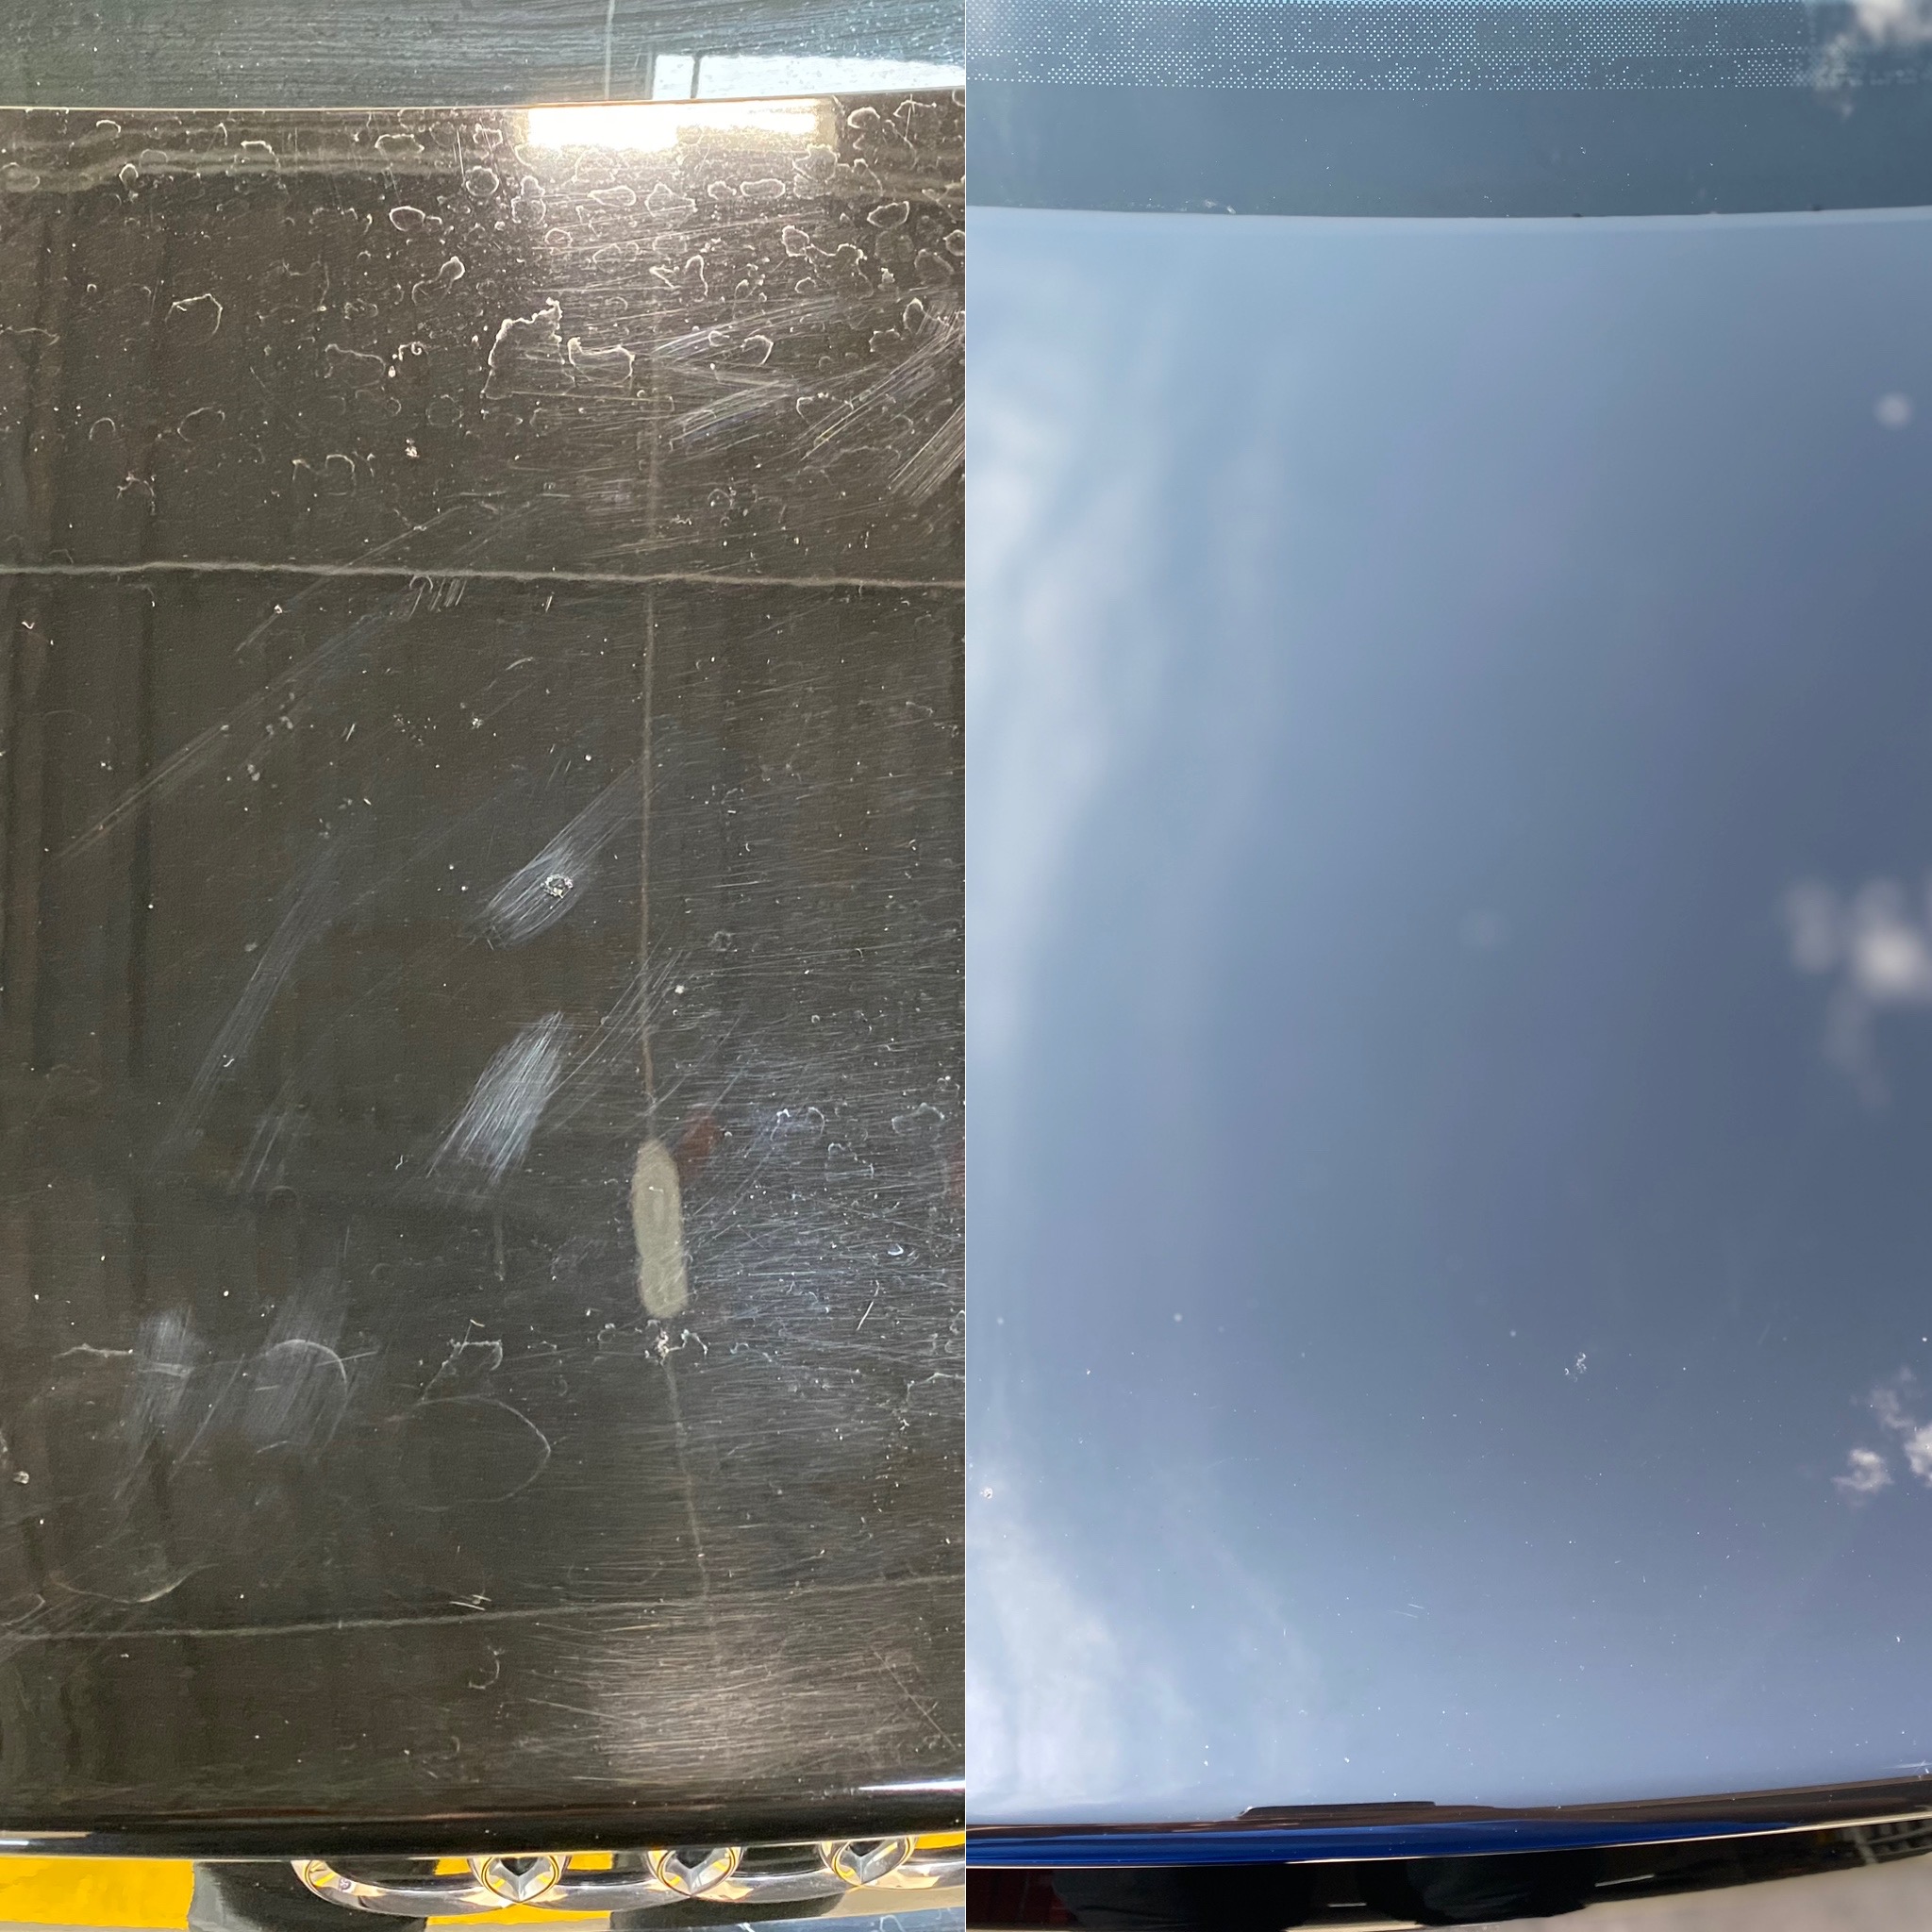 What causes paint swirl marks?